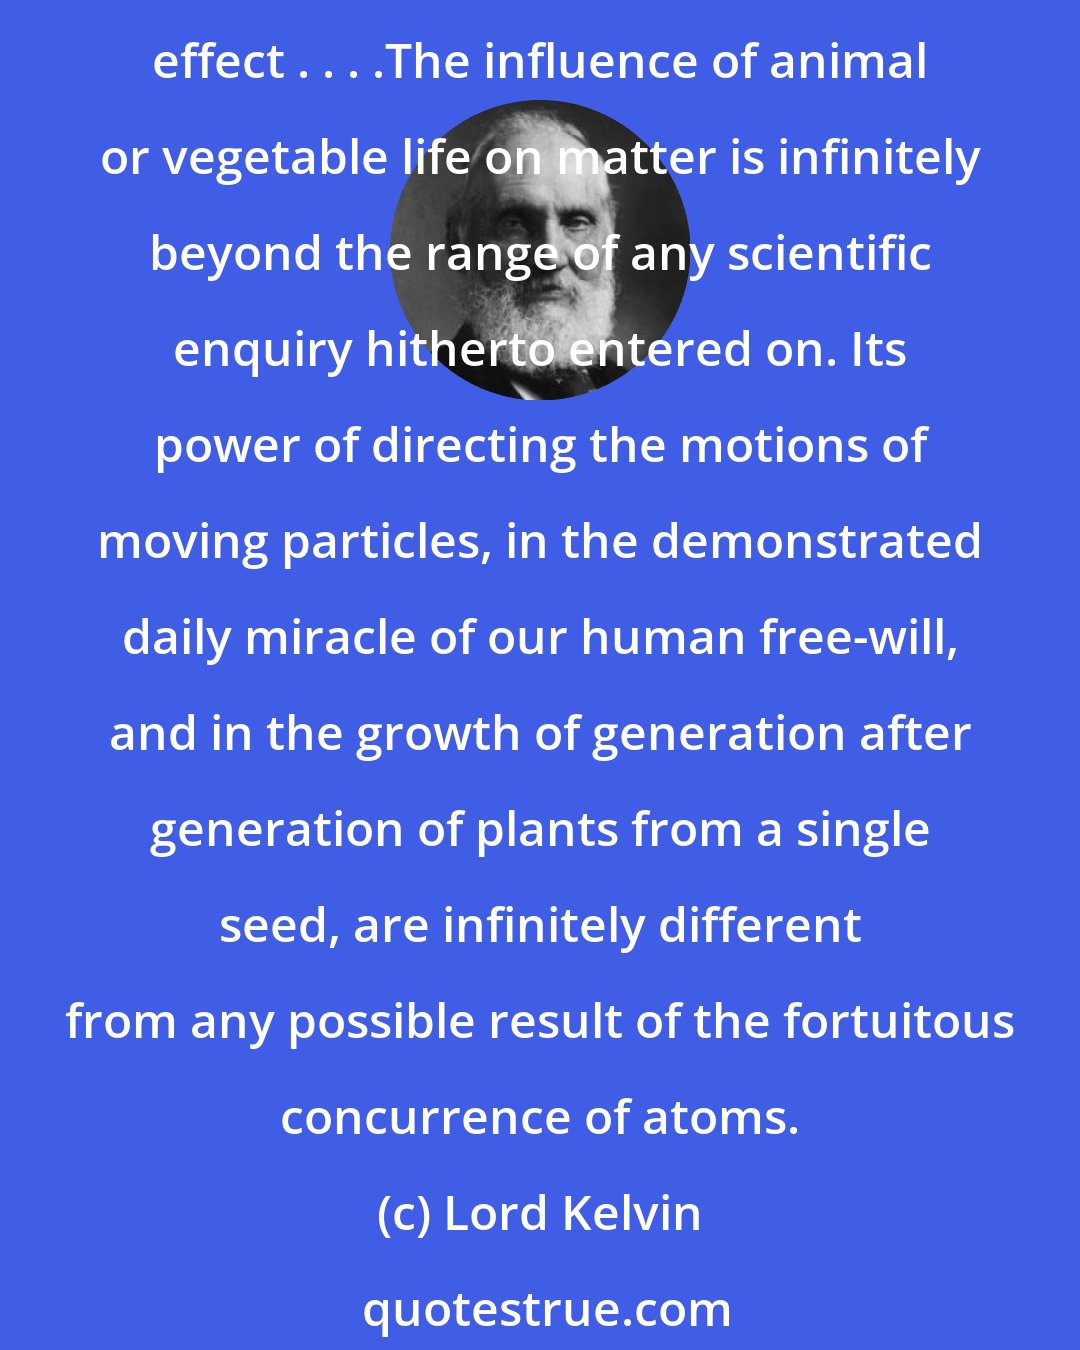 Lord Kelvin: It is conceivable that animal life might have the attribute of using the heat of surrounding matter, at its natural temperature, as a source of energy for mechanical effect . . . .The influence of animal or vegetable life on matter is infinitely beyond the range of any scientific enquiry hitherto entered on. Its power of directing the motions of moving particles, in the demonstrated daily miracle of our human free-will, and in the growth of generation after generation of plants from a single seed, are infinitely different from any possible result of the fortuitous concurrence of atoms.